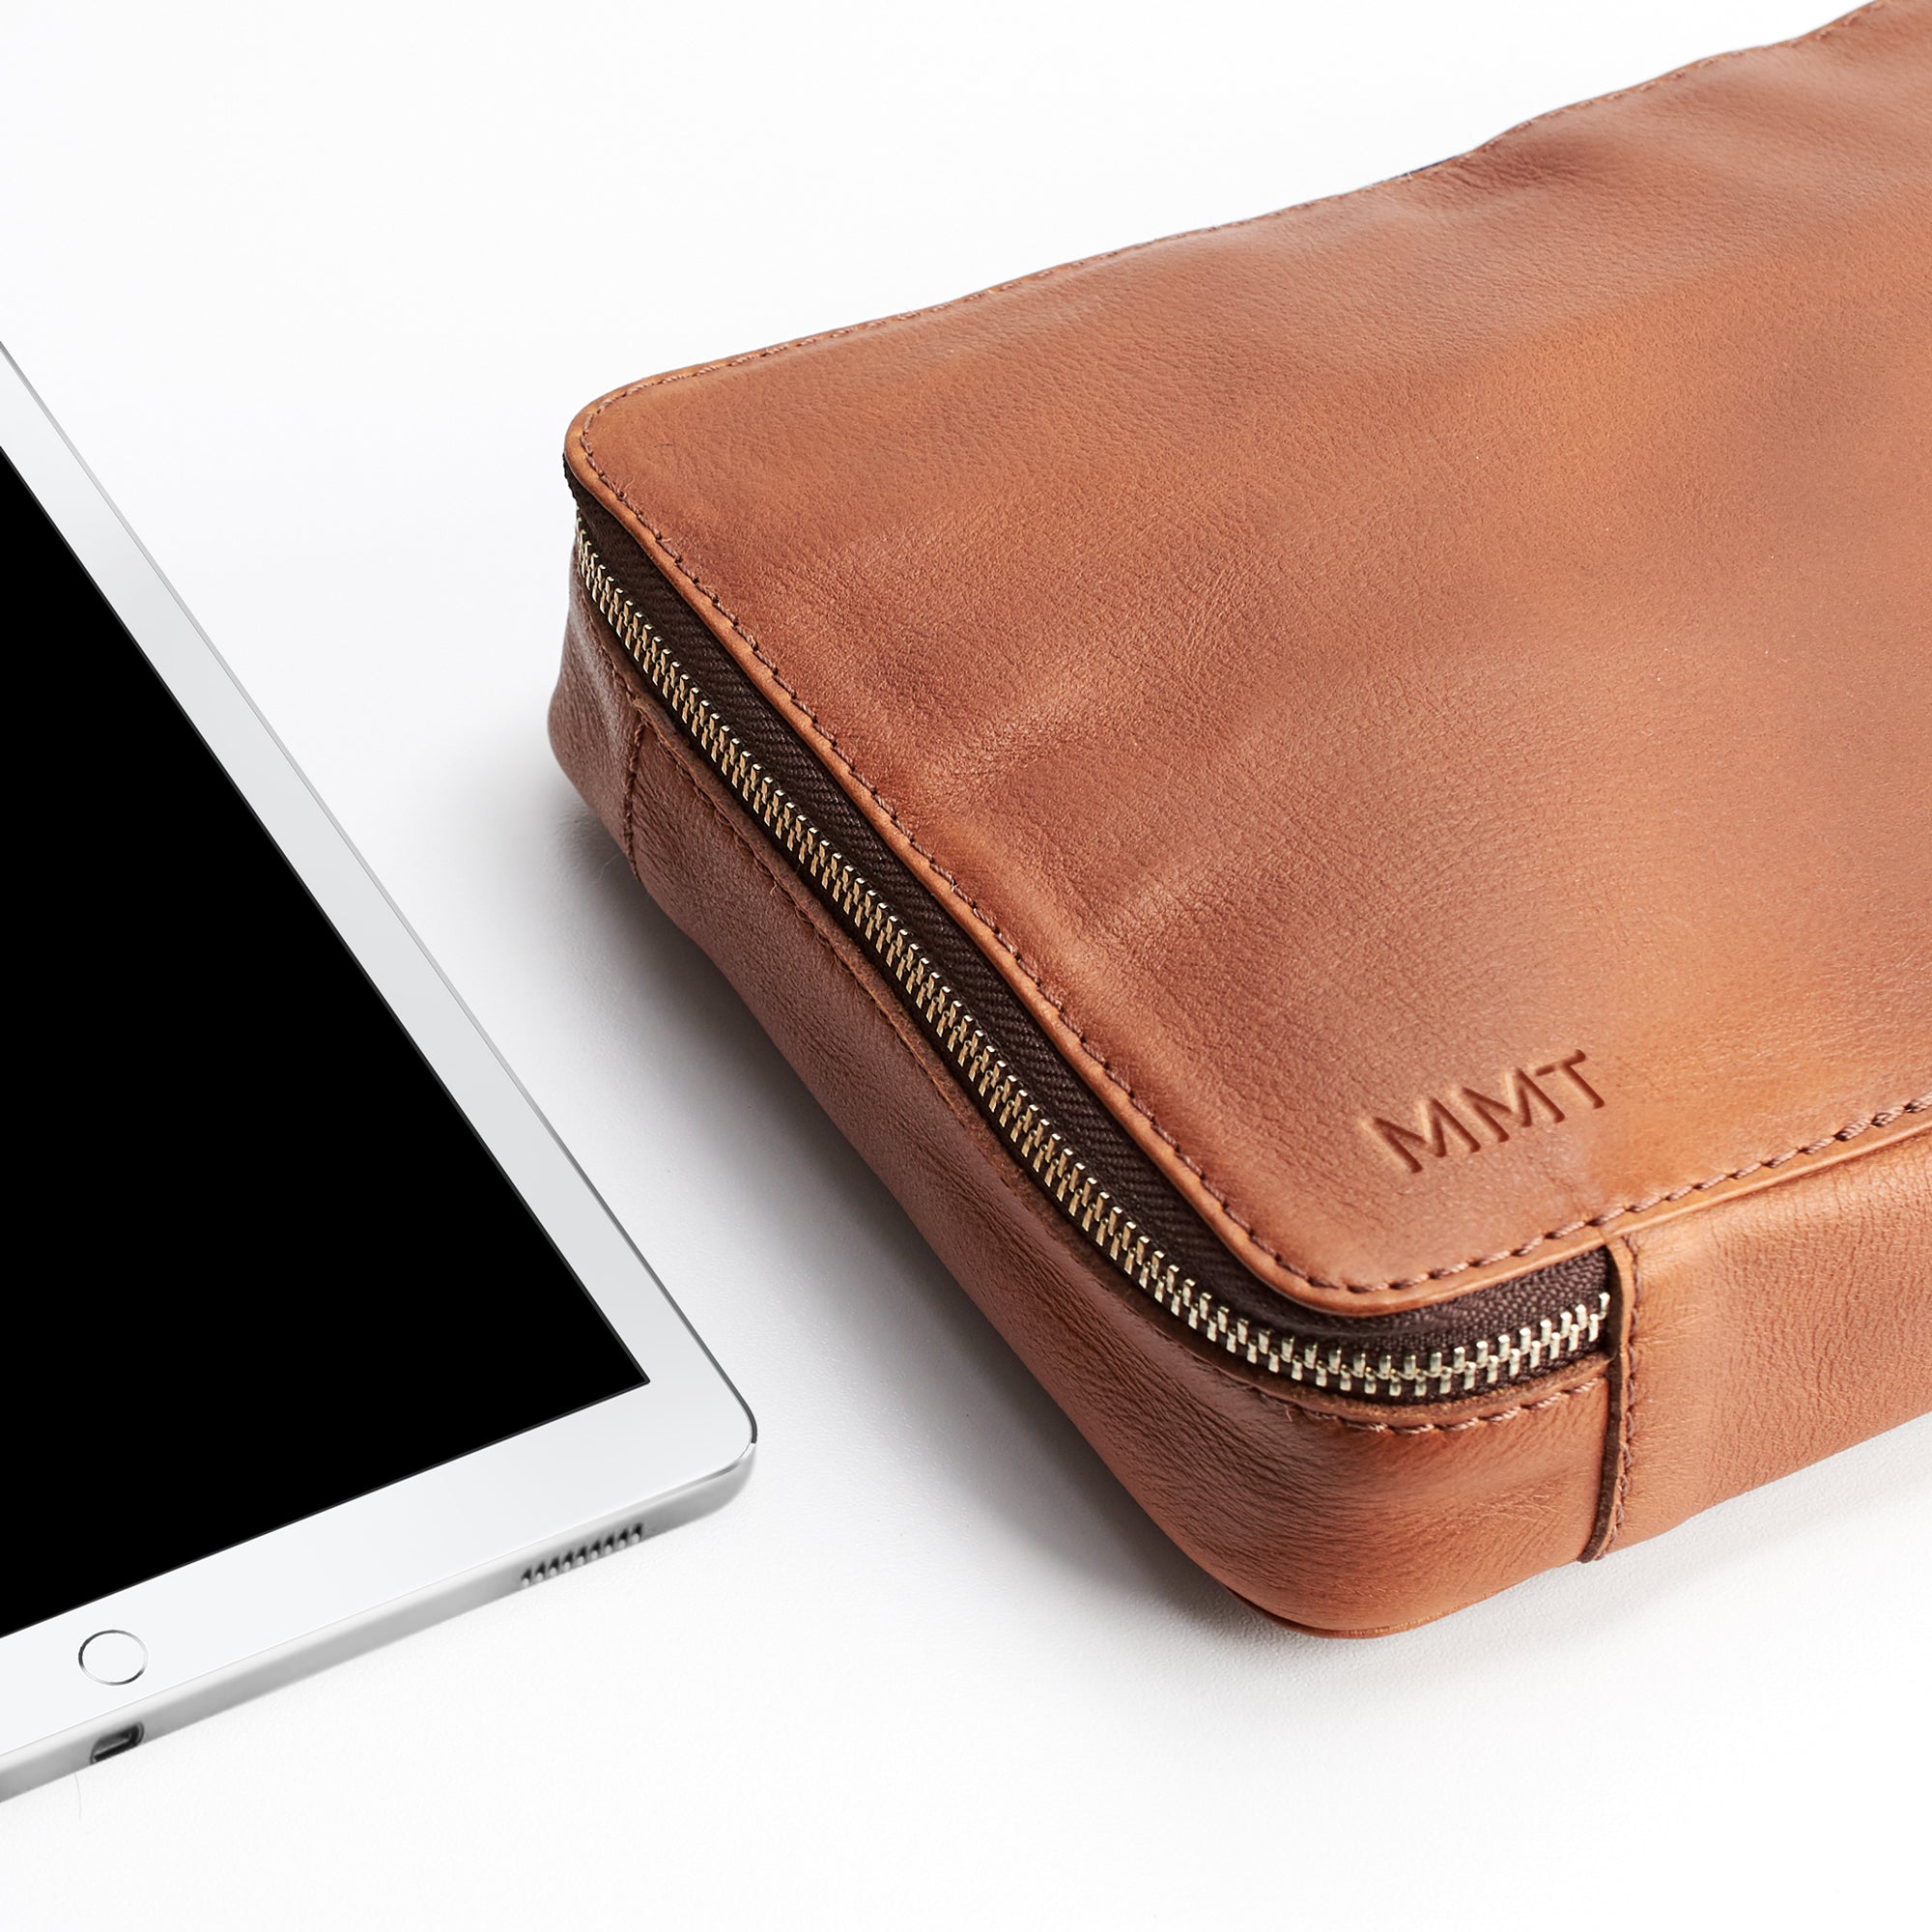 Custom monogram engraving. Best tech organizer bag for travel by Capra Leather. Fits iPad Air with Apple pencil.